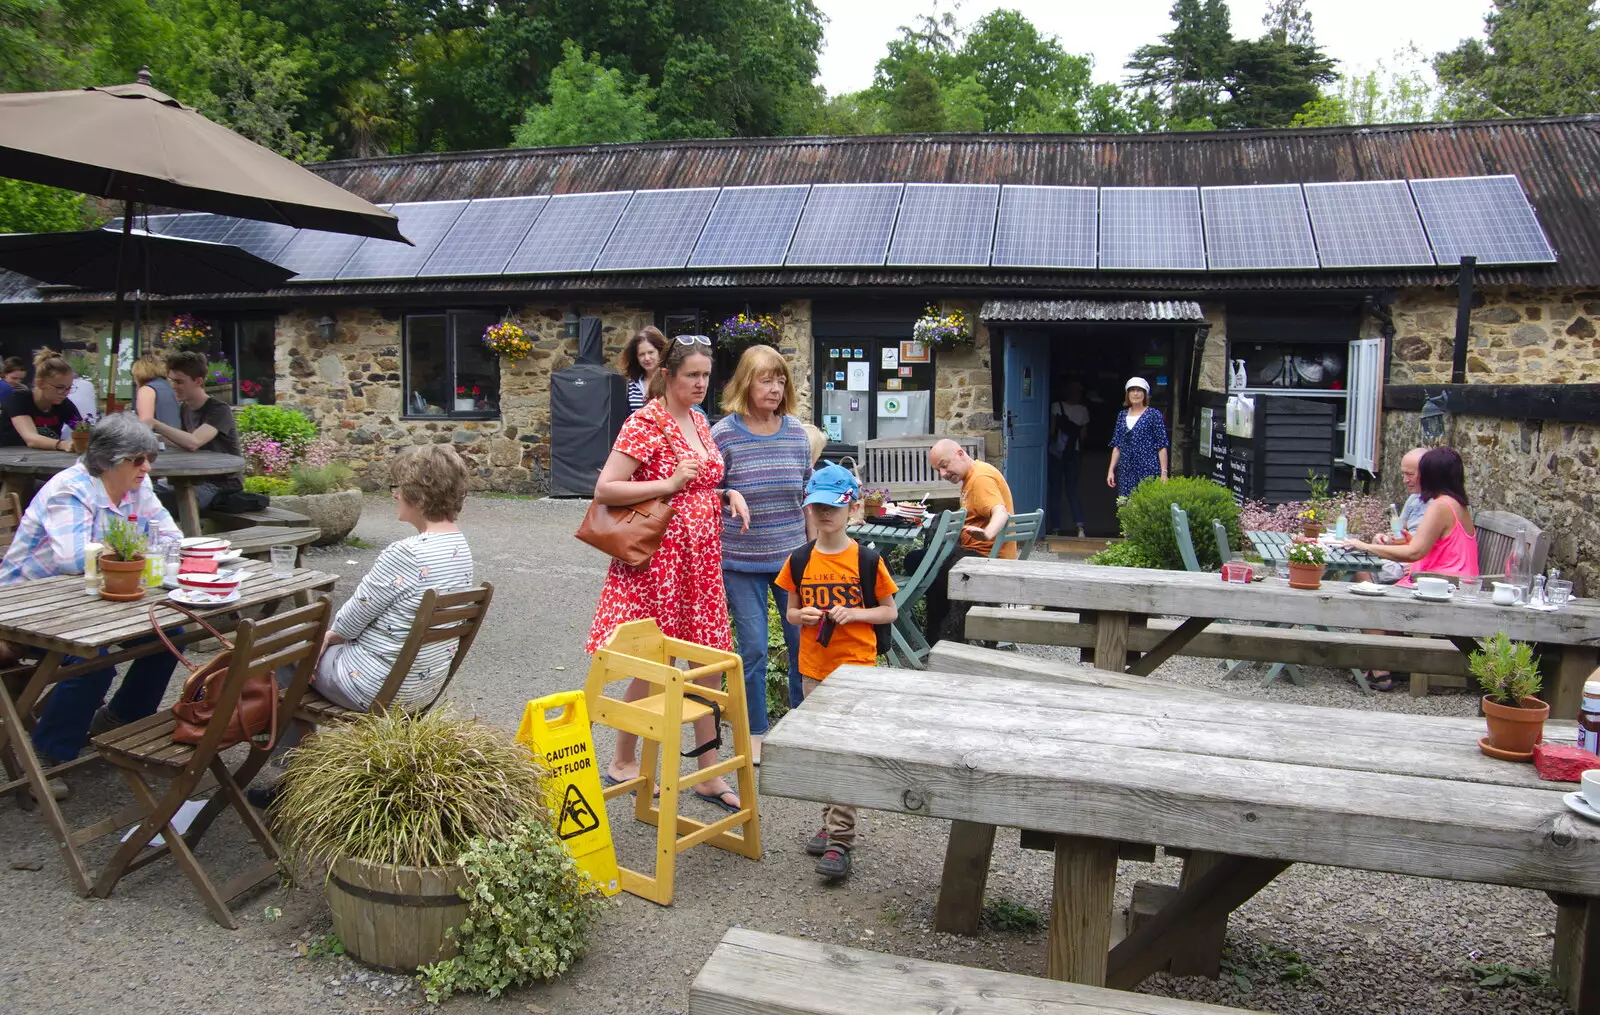 In the café courtyard, from Chagford Lido and a Trip to Parke, Bovey Tracey, Devon - 25th May 2019